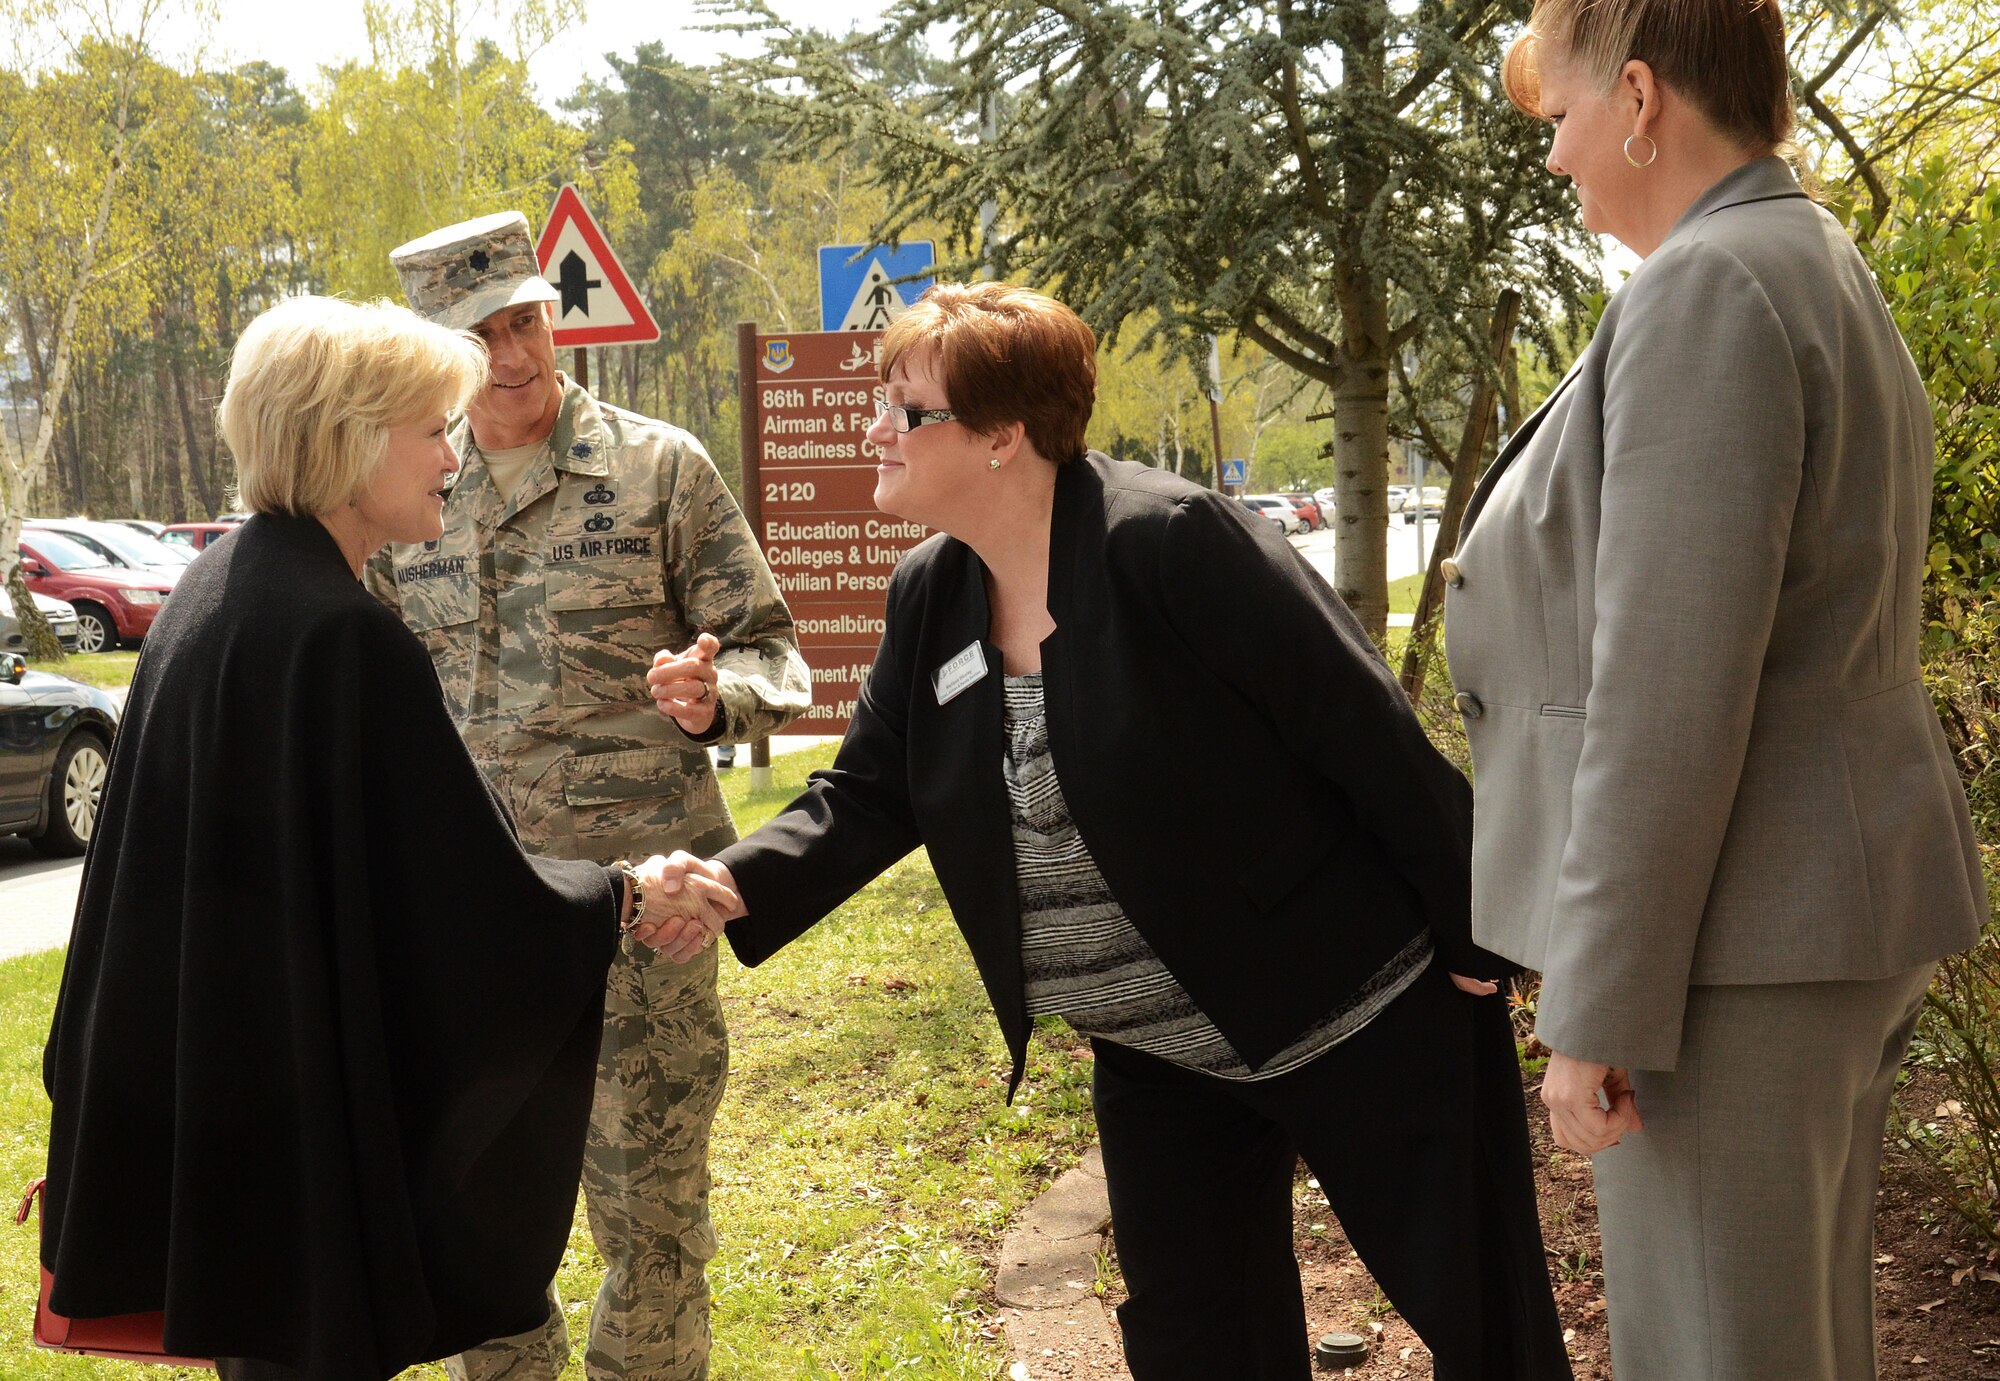 Mrs. Dawn Goldfein, wife of U.S. Air Force Vice Chief of Staff Gen. David L. Goldfein, is greeted by Lt. Col. Thomas Ausherman, 86th Force Support Squadron commander, and members from the Ramstein Airman and Family Readiness Center here at Ramstein Air Base, Germany, 18 April 2016. Mrs. Goldfein had the opportunity to meet with other spouses at Ramstein and several dependents that were part of the ordered departure from Turkey last month. (U.S. Air Force photo/Master Sgt. Amanda Callahan)